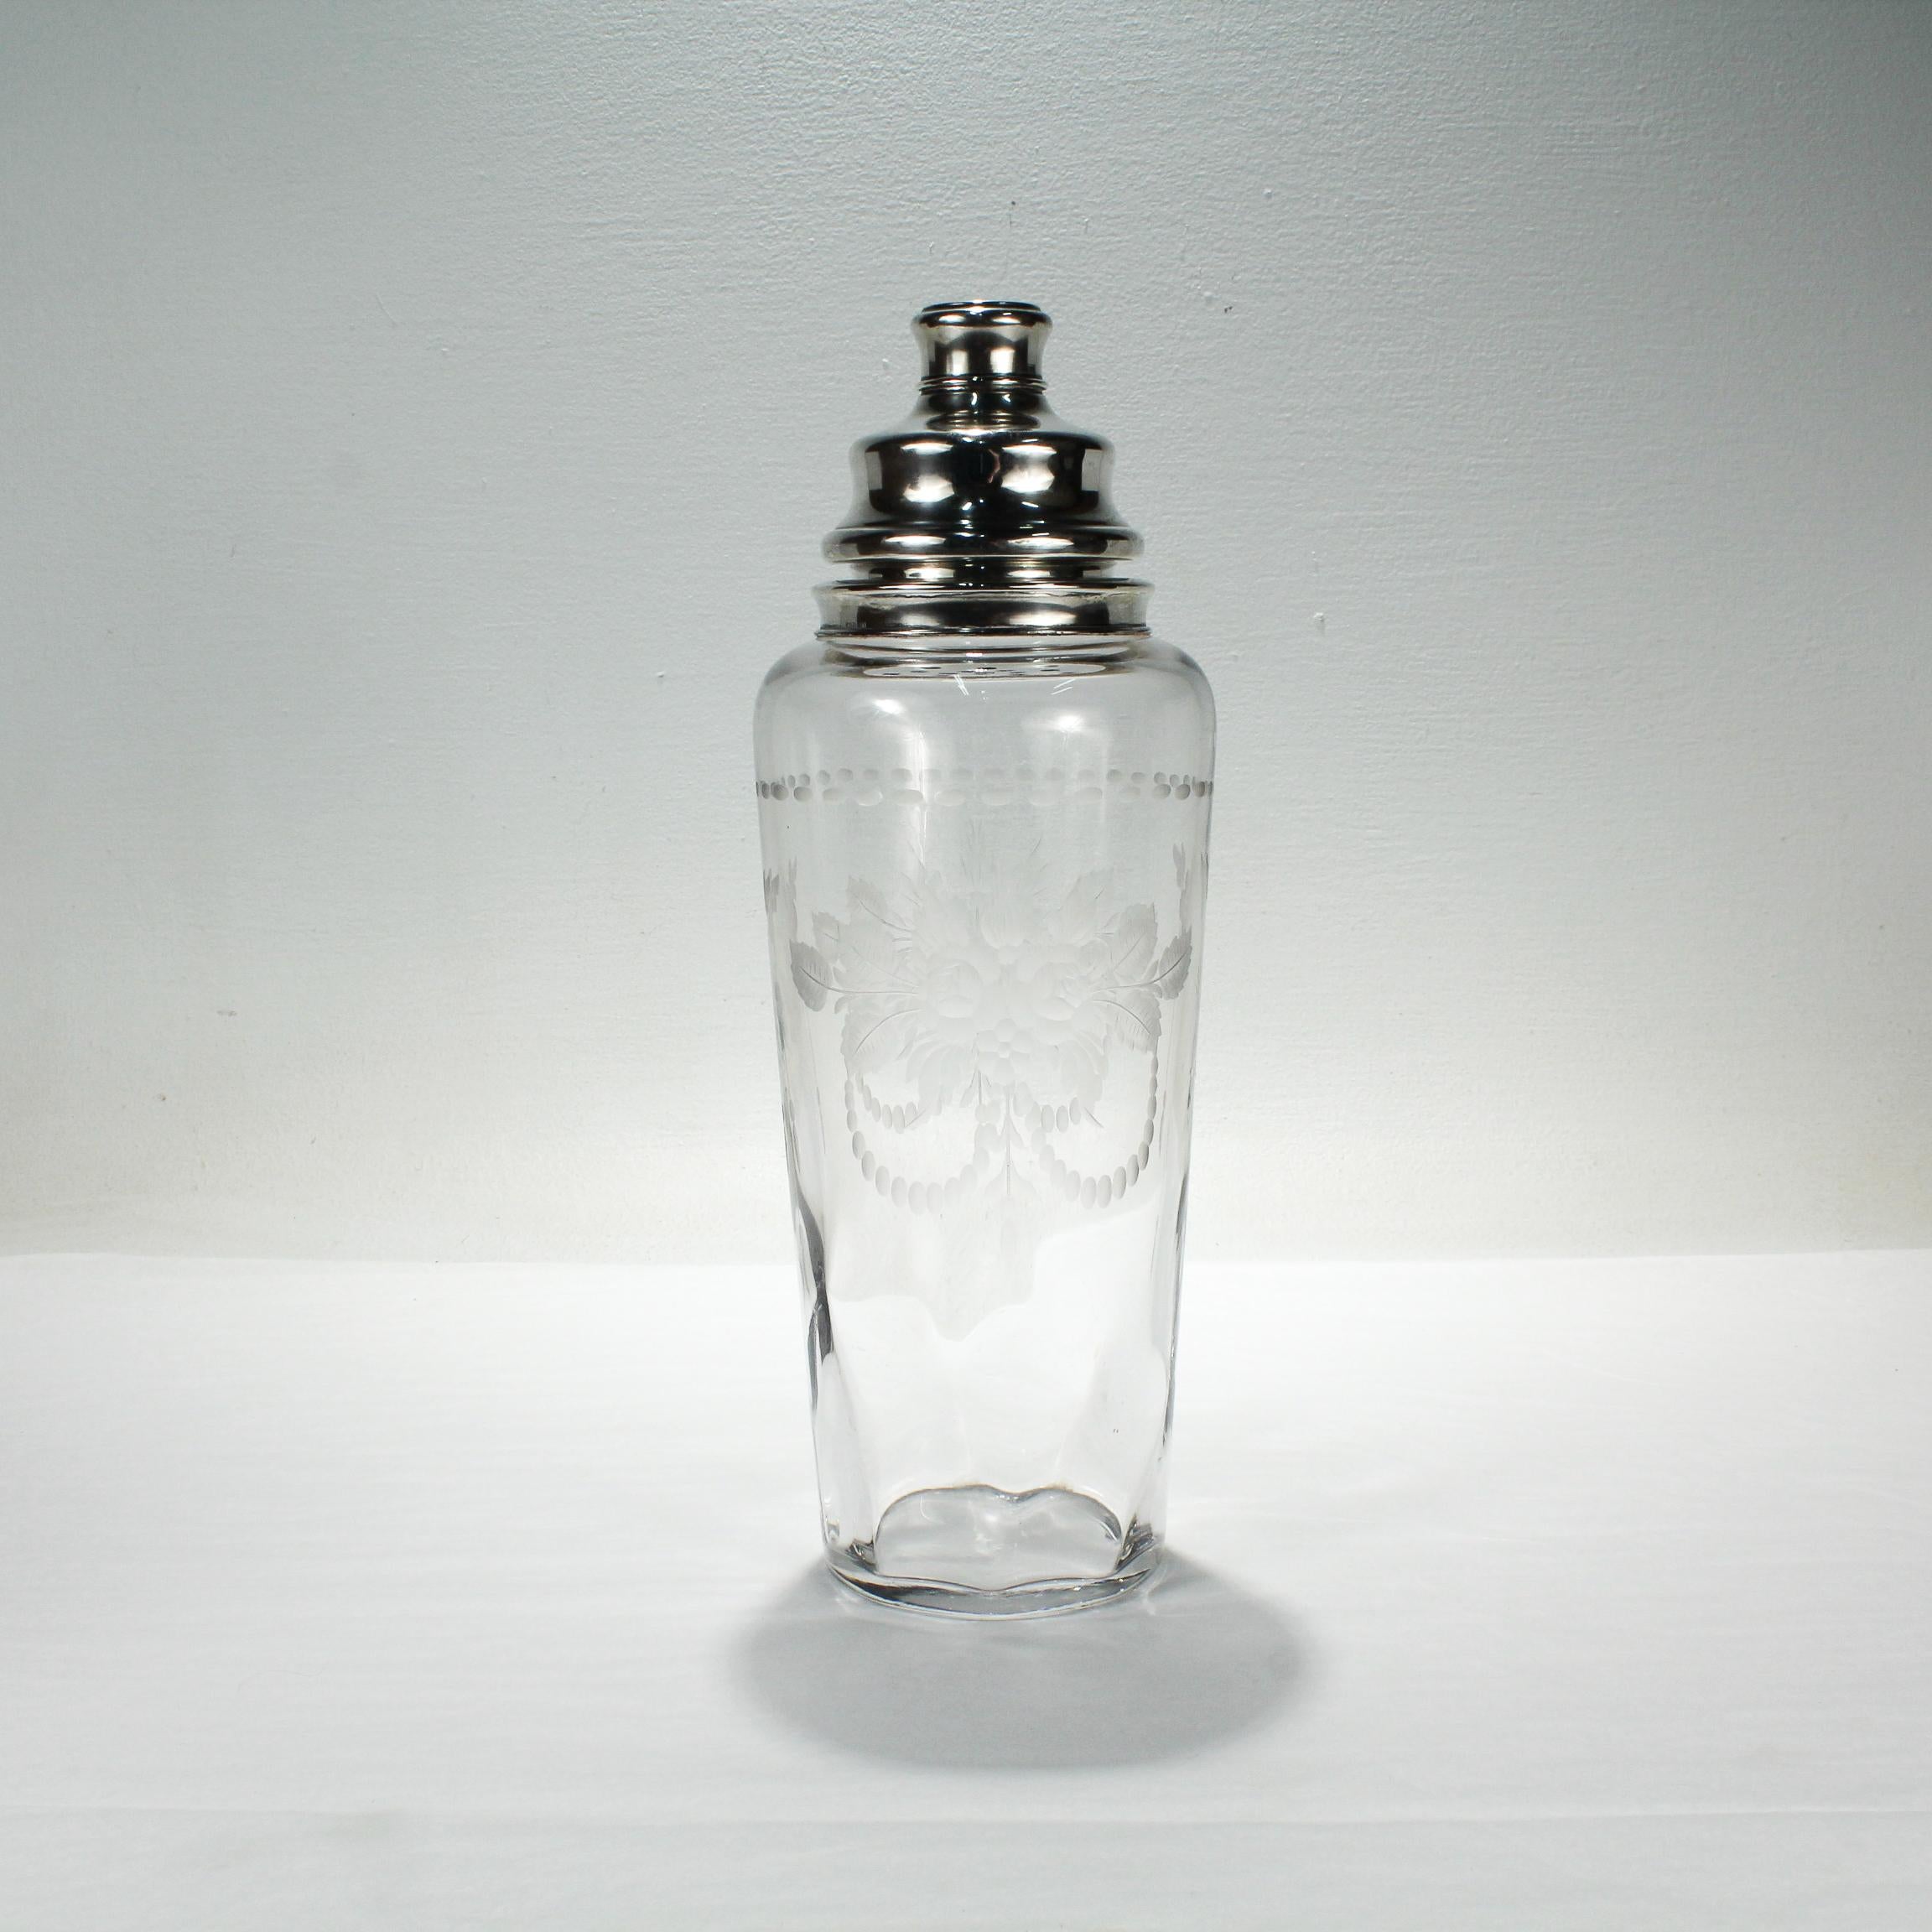 A fine Art Deco sterling silver & engraved glass cocktail shaker.

By Hawkes.

With finely cut, wheel engraved, decoration to the body and a sterling silver mount and lid

Simply a superb cocktail shaker from Hawkes!

Date:
ca. 1930

Overall